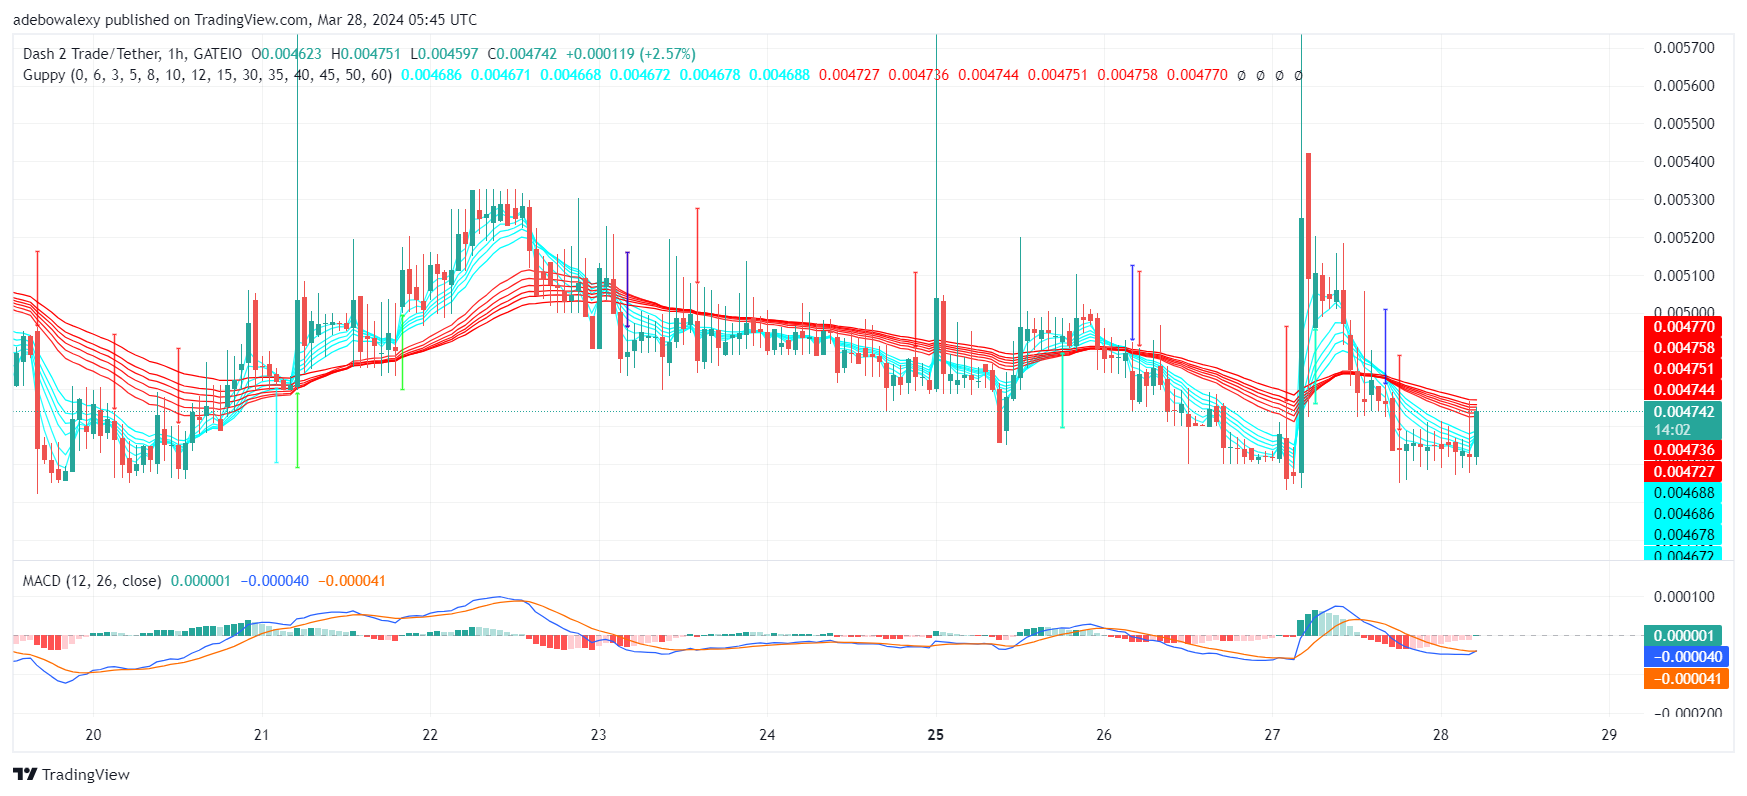 Dash 2 Trade Price Prediction for April 3: D2T Stabilizes Above the $0.00400 Mark